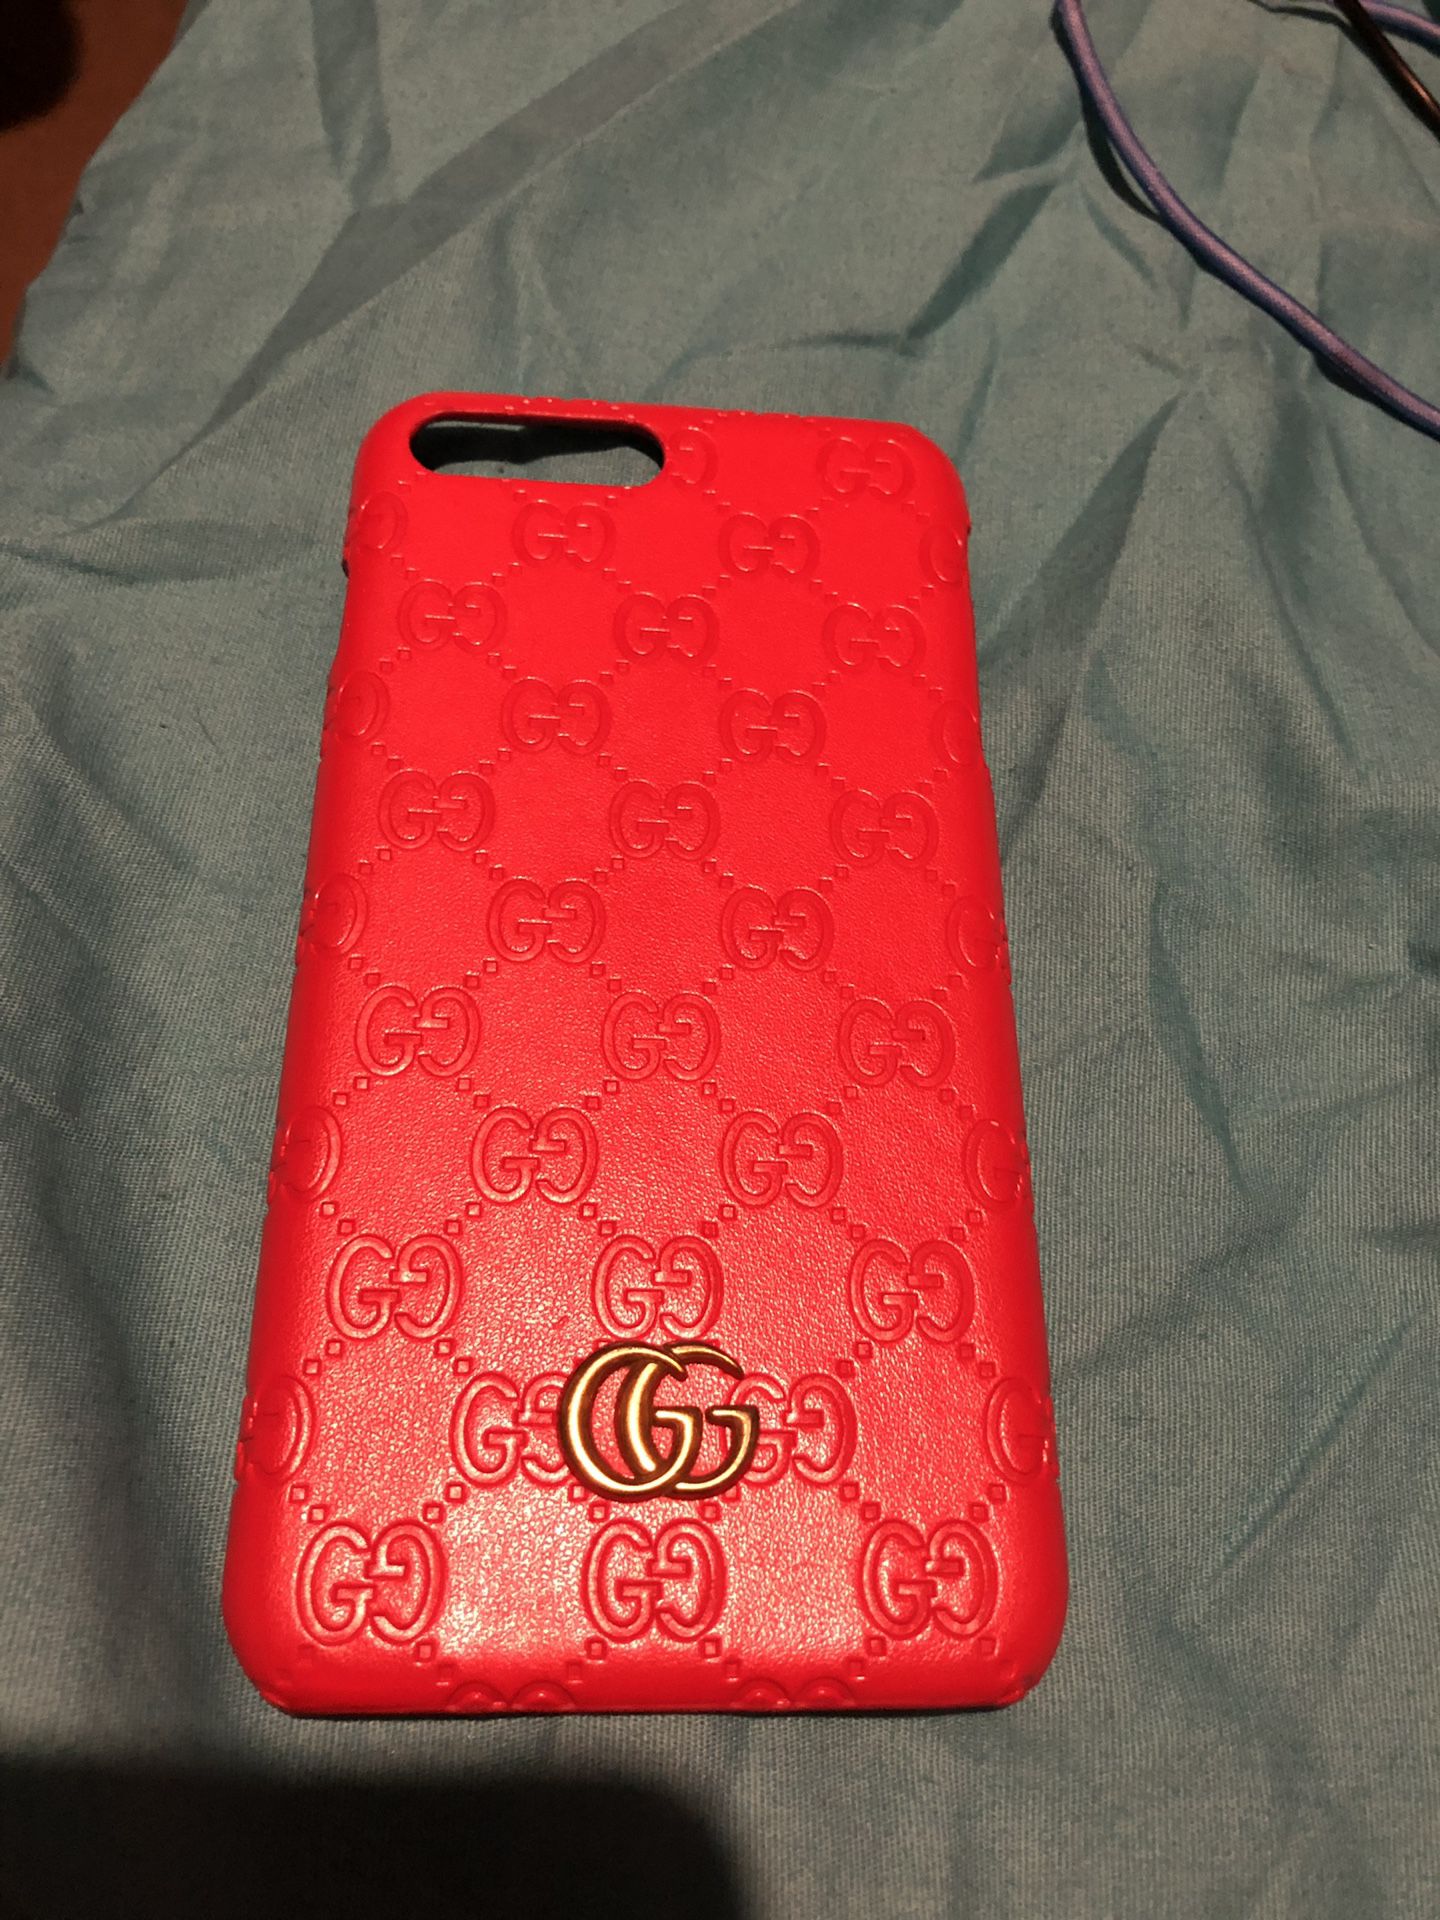 Gucci iPhone plus case for Sale in New Port Richey, FL OfferUp